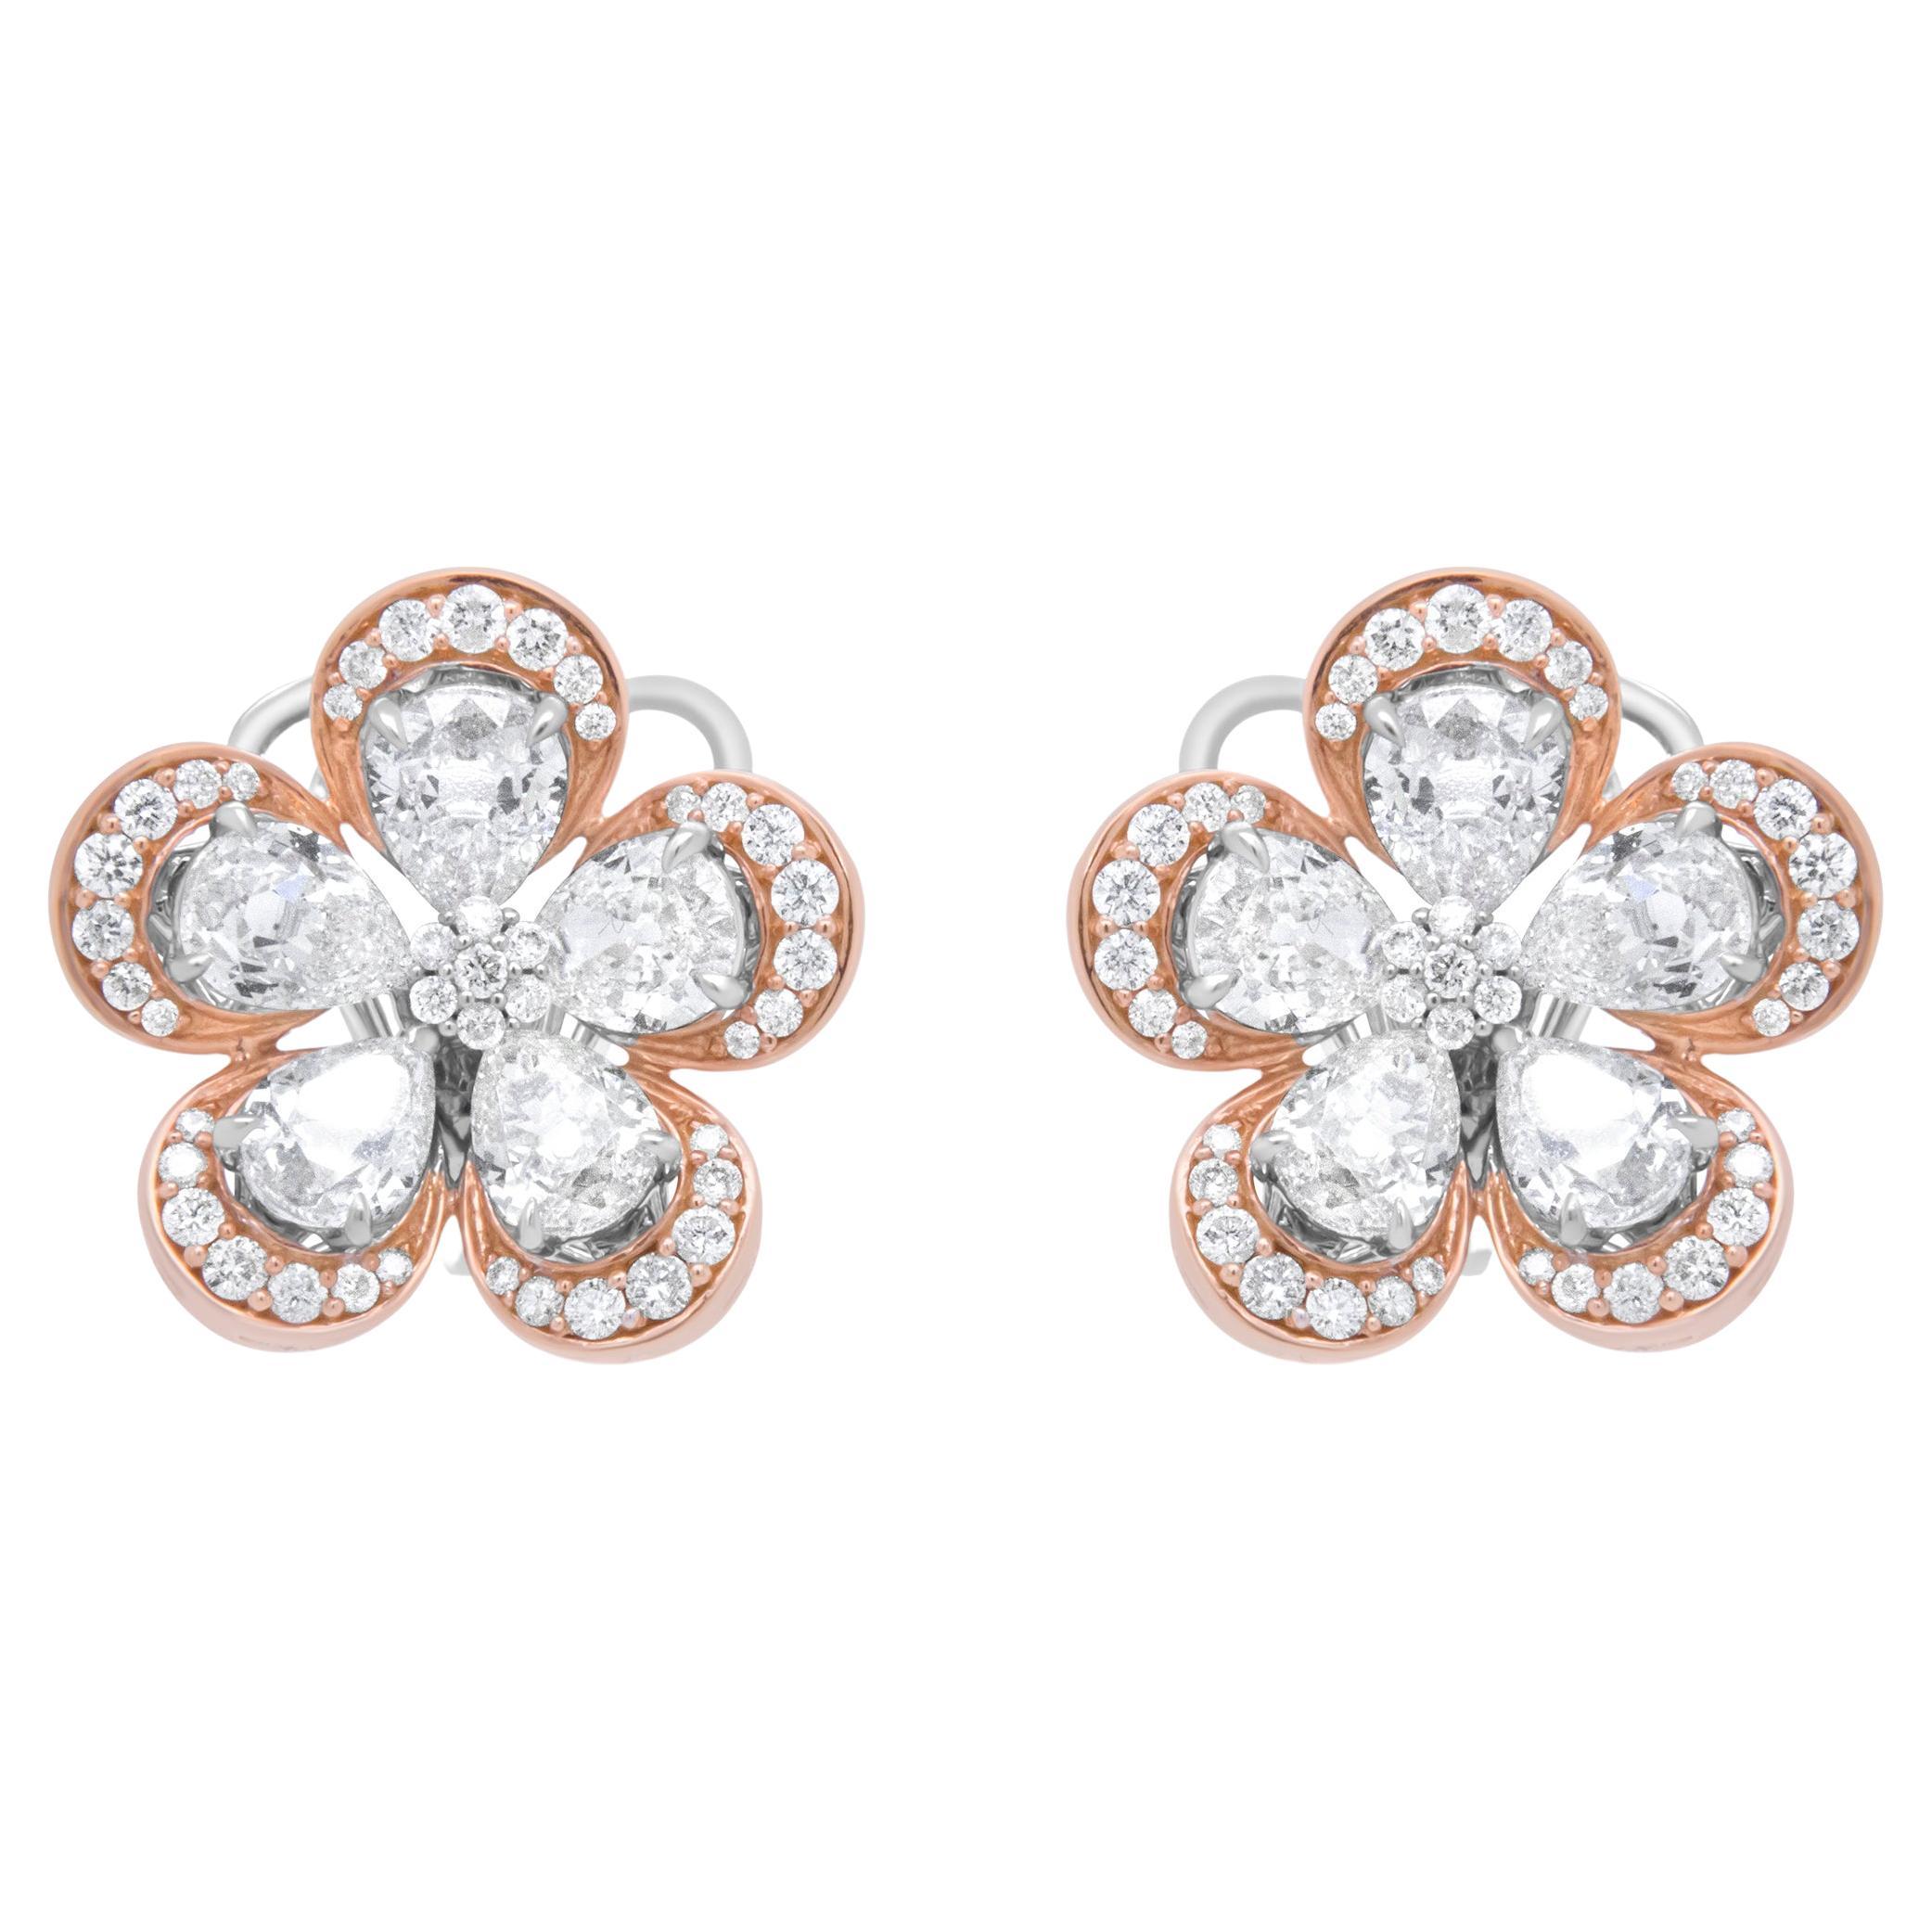 18K White and Rose Gold 6.0 Carat Diamond Floral Blossom Stud Earring